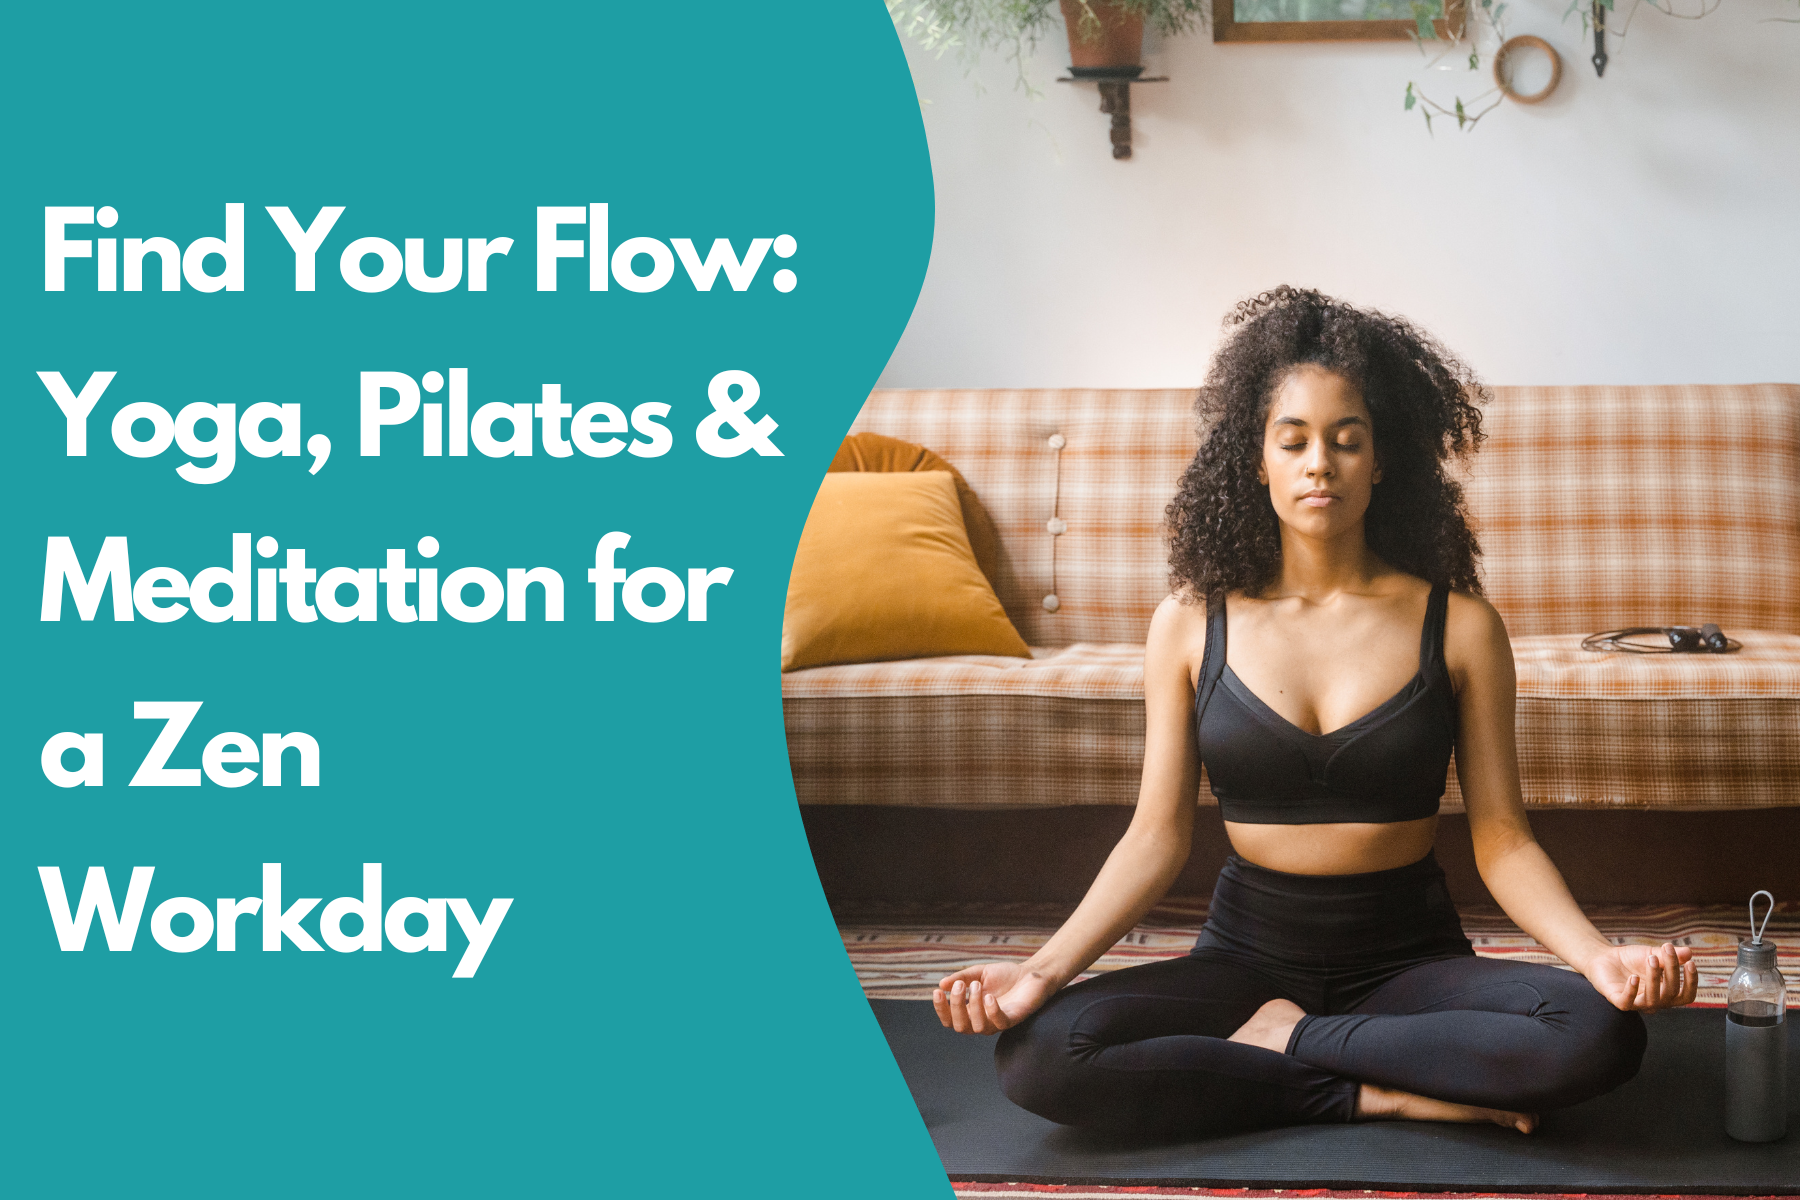 Find Your Flow: Yoga, Pilates & Meditation for a Zen Workday